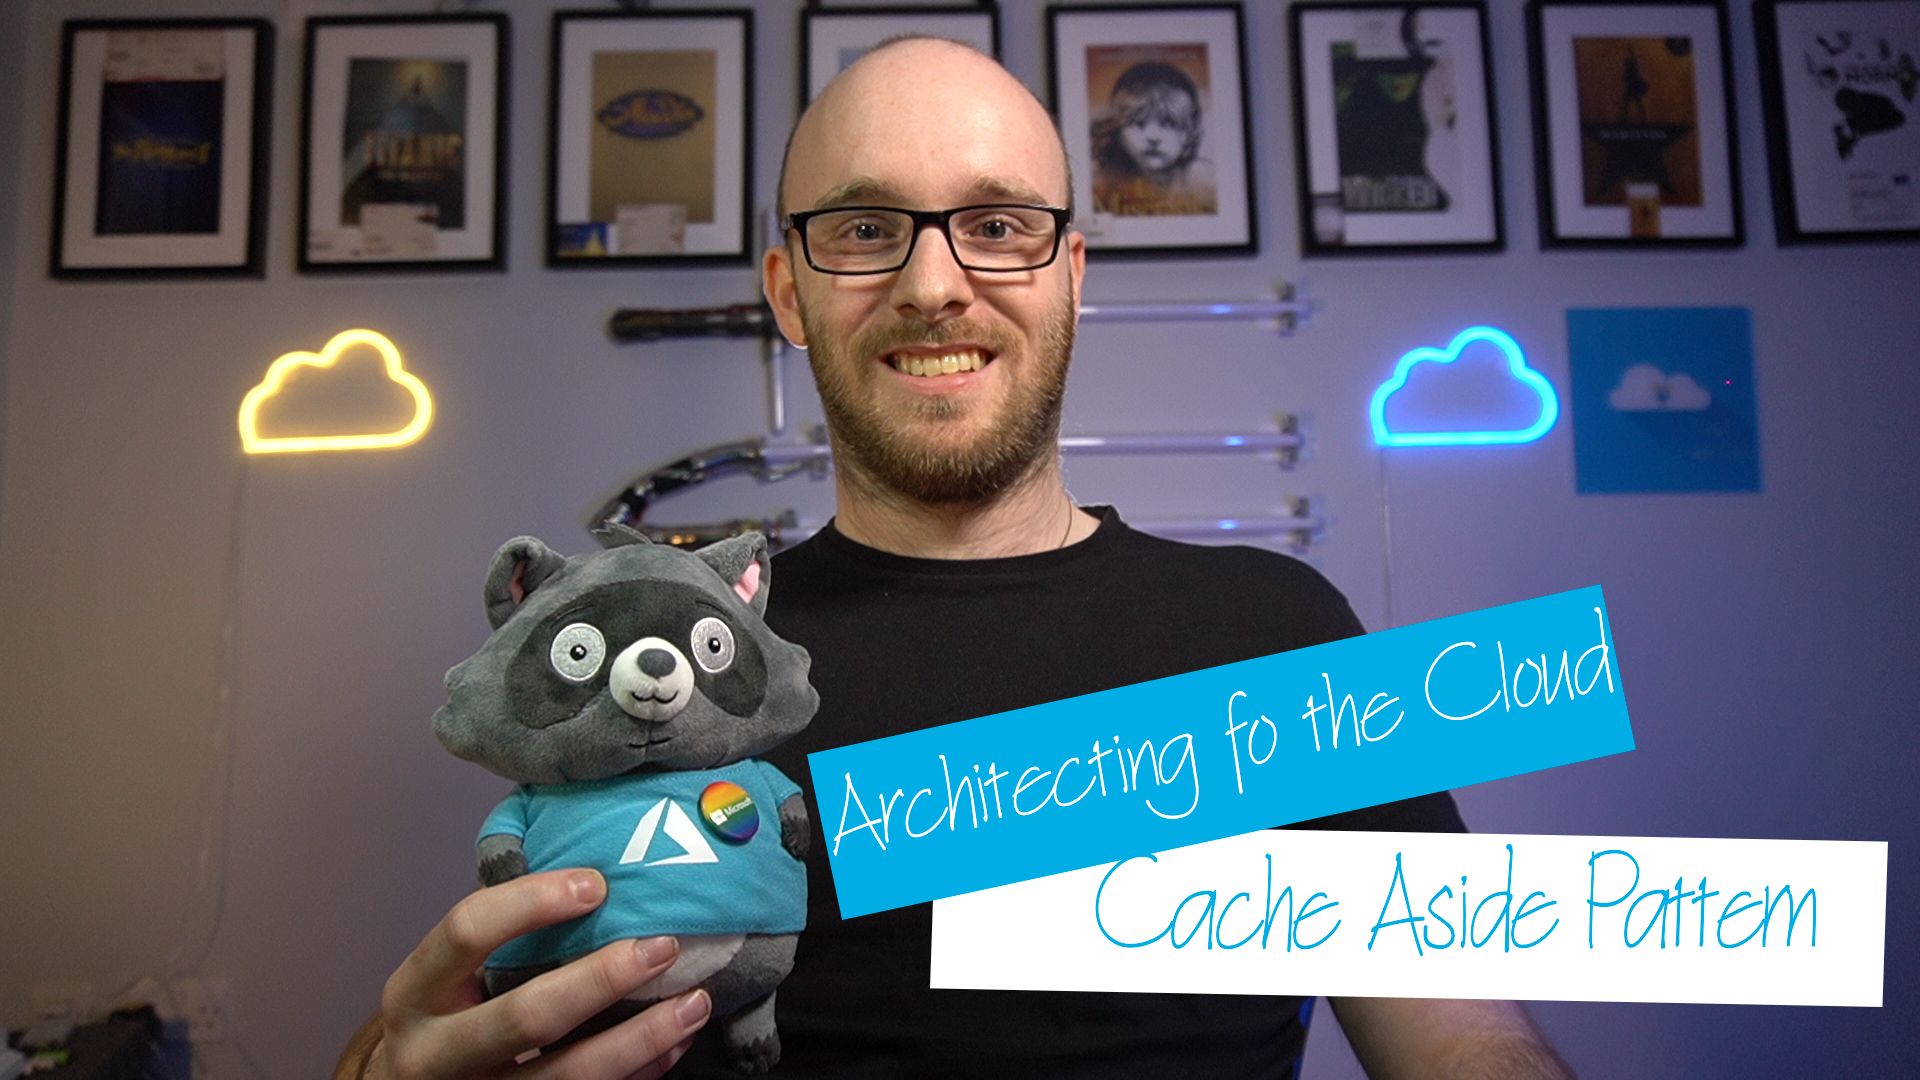 30 - The Cache Aside Pattern (Optimise your caching approach!)